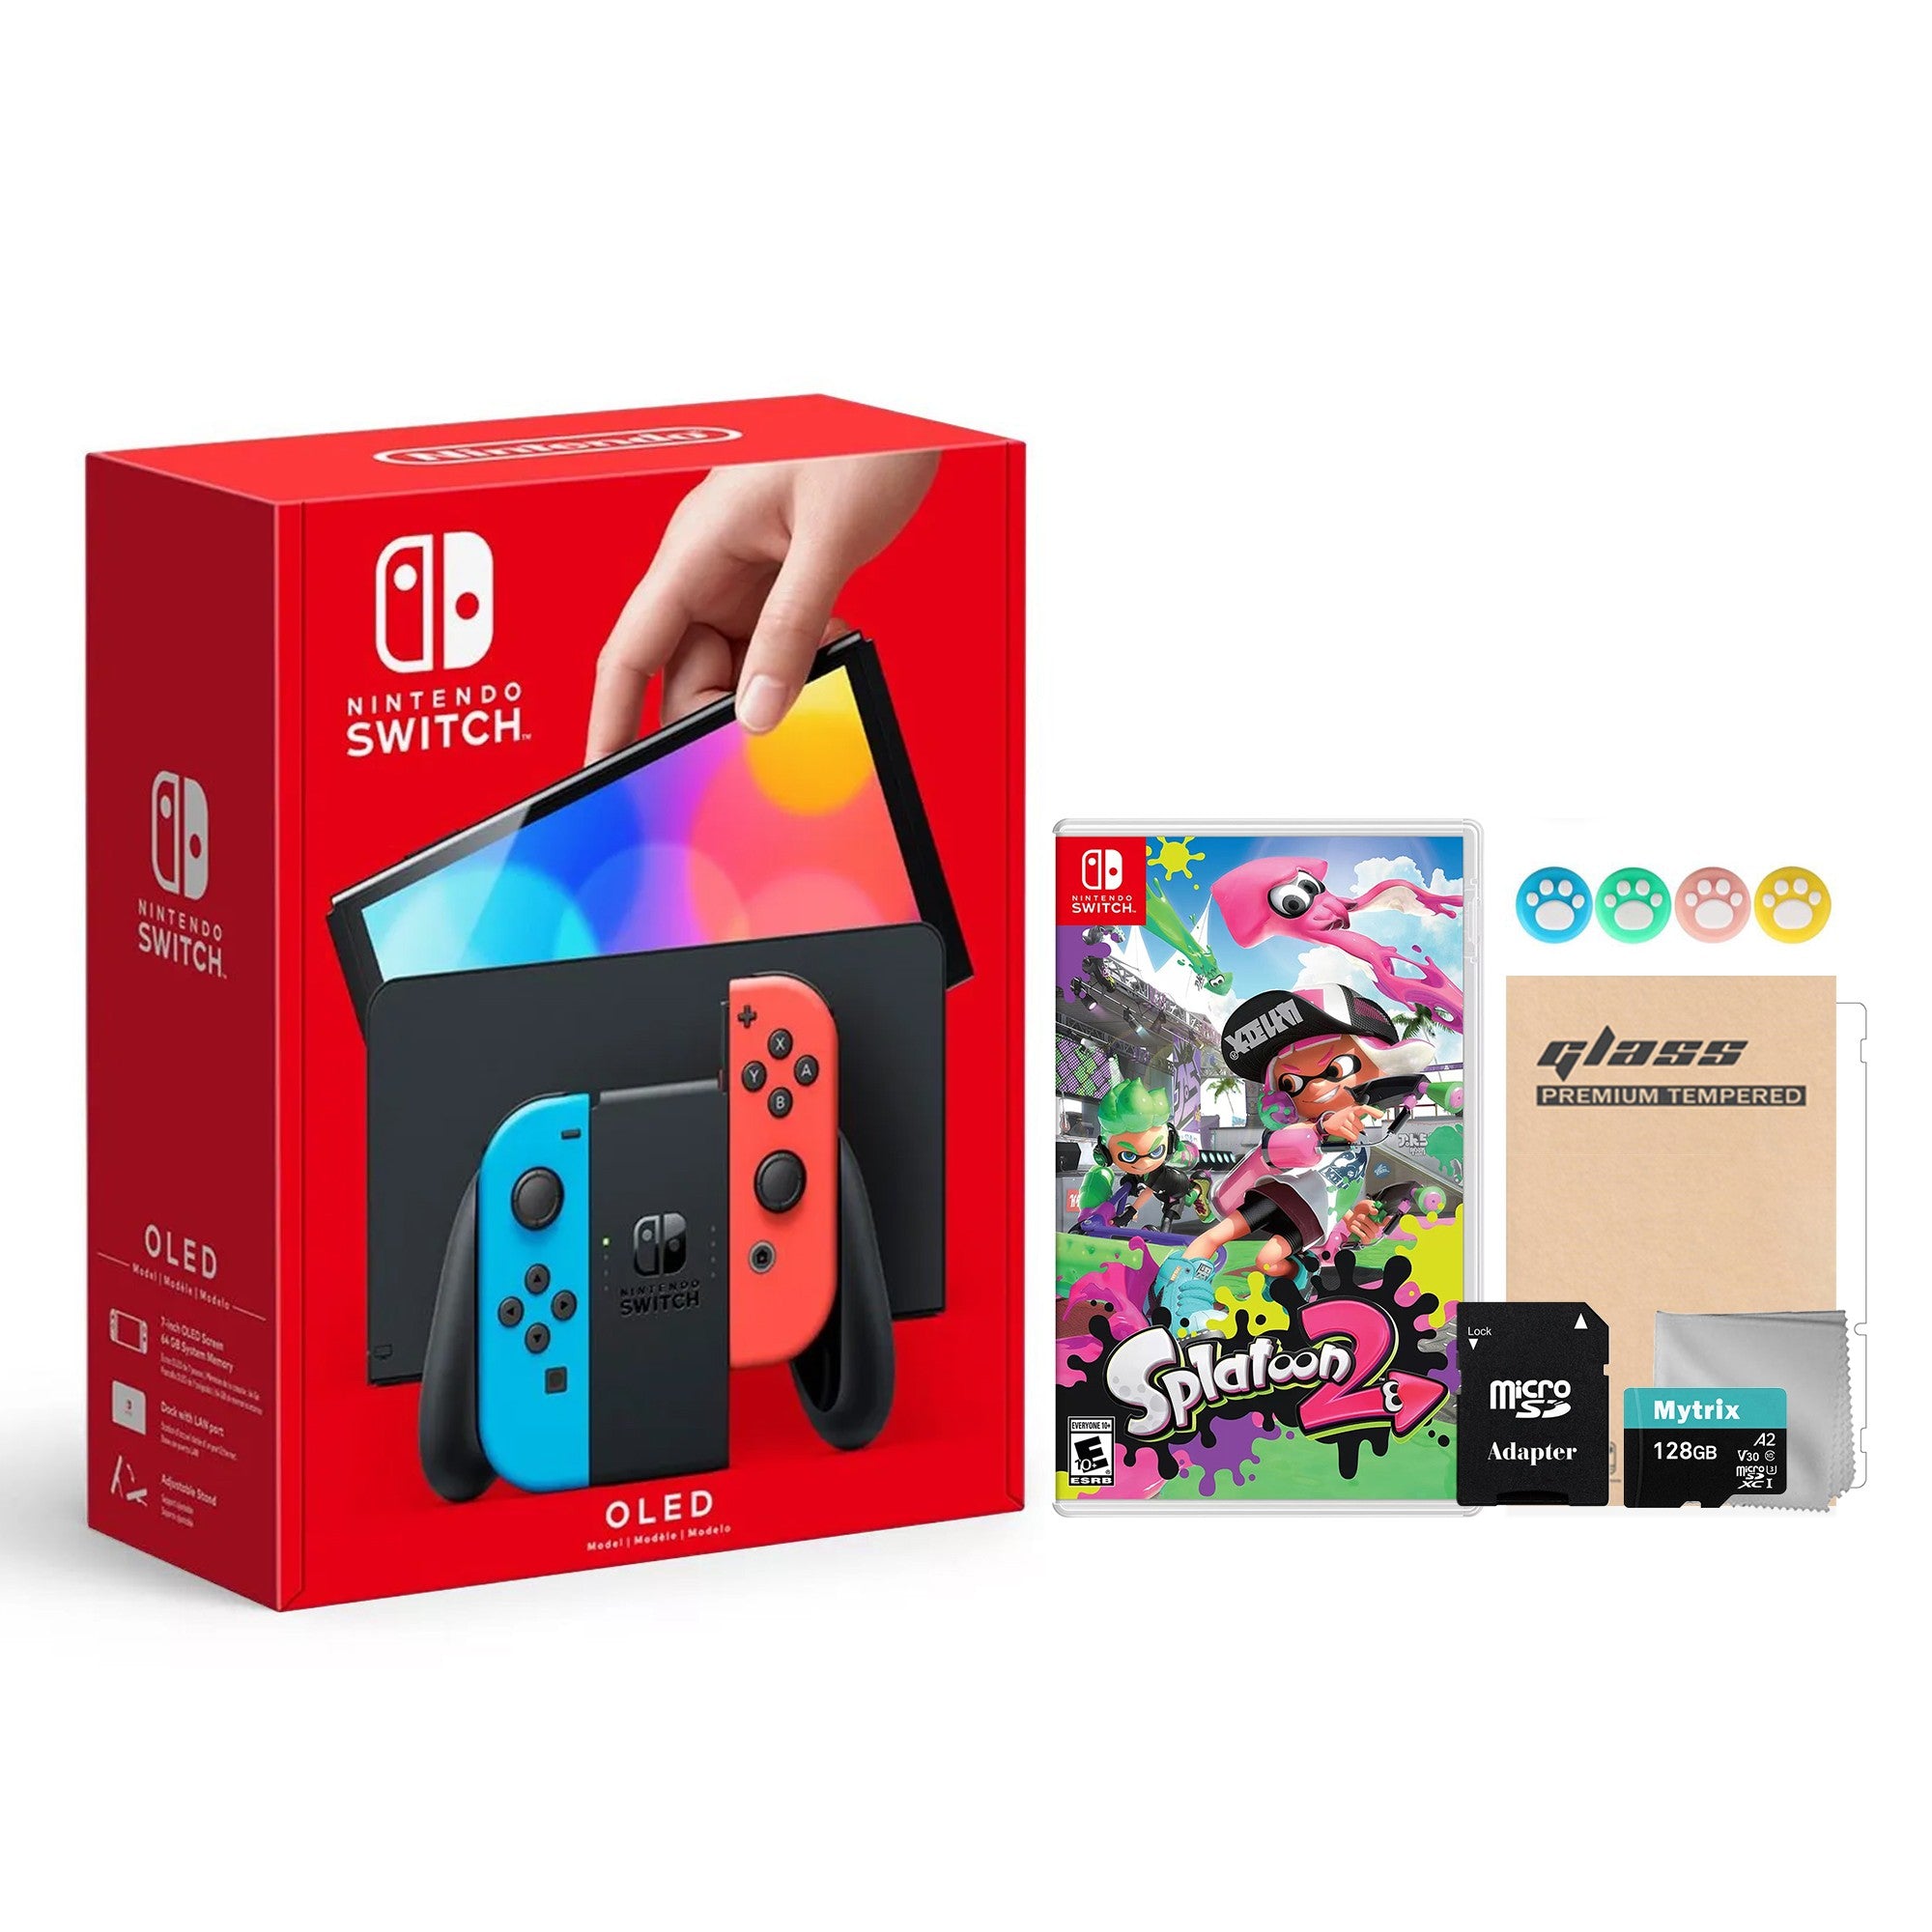 2022 New Nintendo Switch OLED Model Neon Red & Blue Joy Con 64GB Console HD Screen & LAN-Port Dock with Splatoon 2, Mytrix 128GB MicroSD Card and Accessories